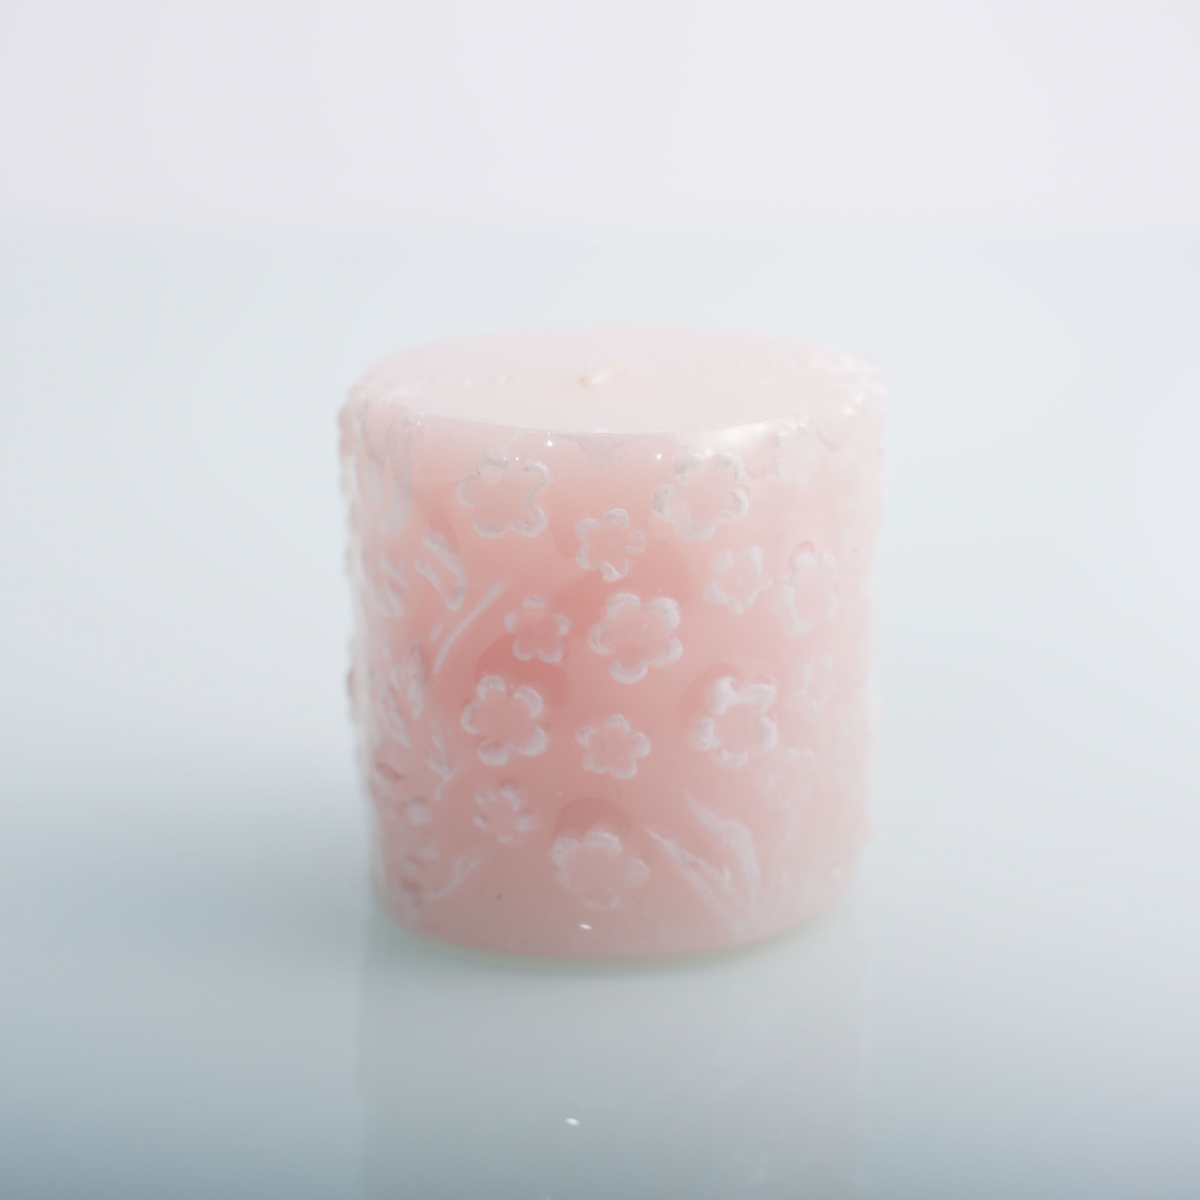 Small Pillar Candles：Plum Flower Carved ,Soild Colorful Pillar Candle ,Heat Shrink Wrap Package, China Factory ,Best Price-HOWCANDLE-Candles,Scented Candles,Aromatherapy Candles,Soy Candles,Vegan Candles,Jar Candles,Pillar Candles,Candle Gift Sets,Essential Oils,Reed Diffuser,Candle Holder,